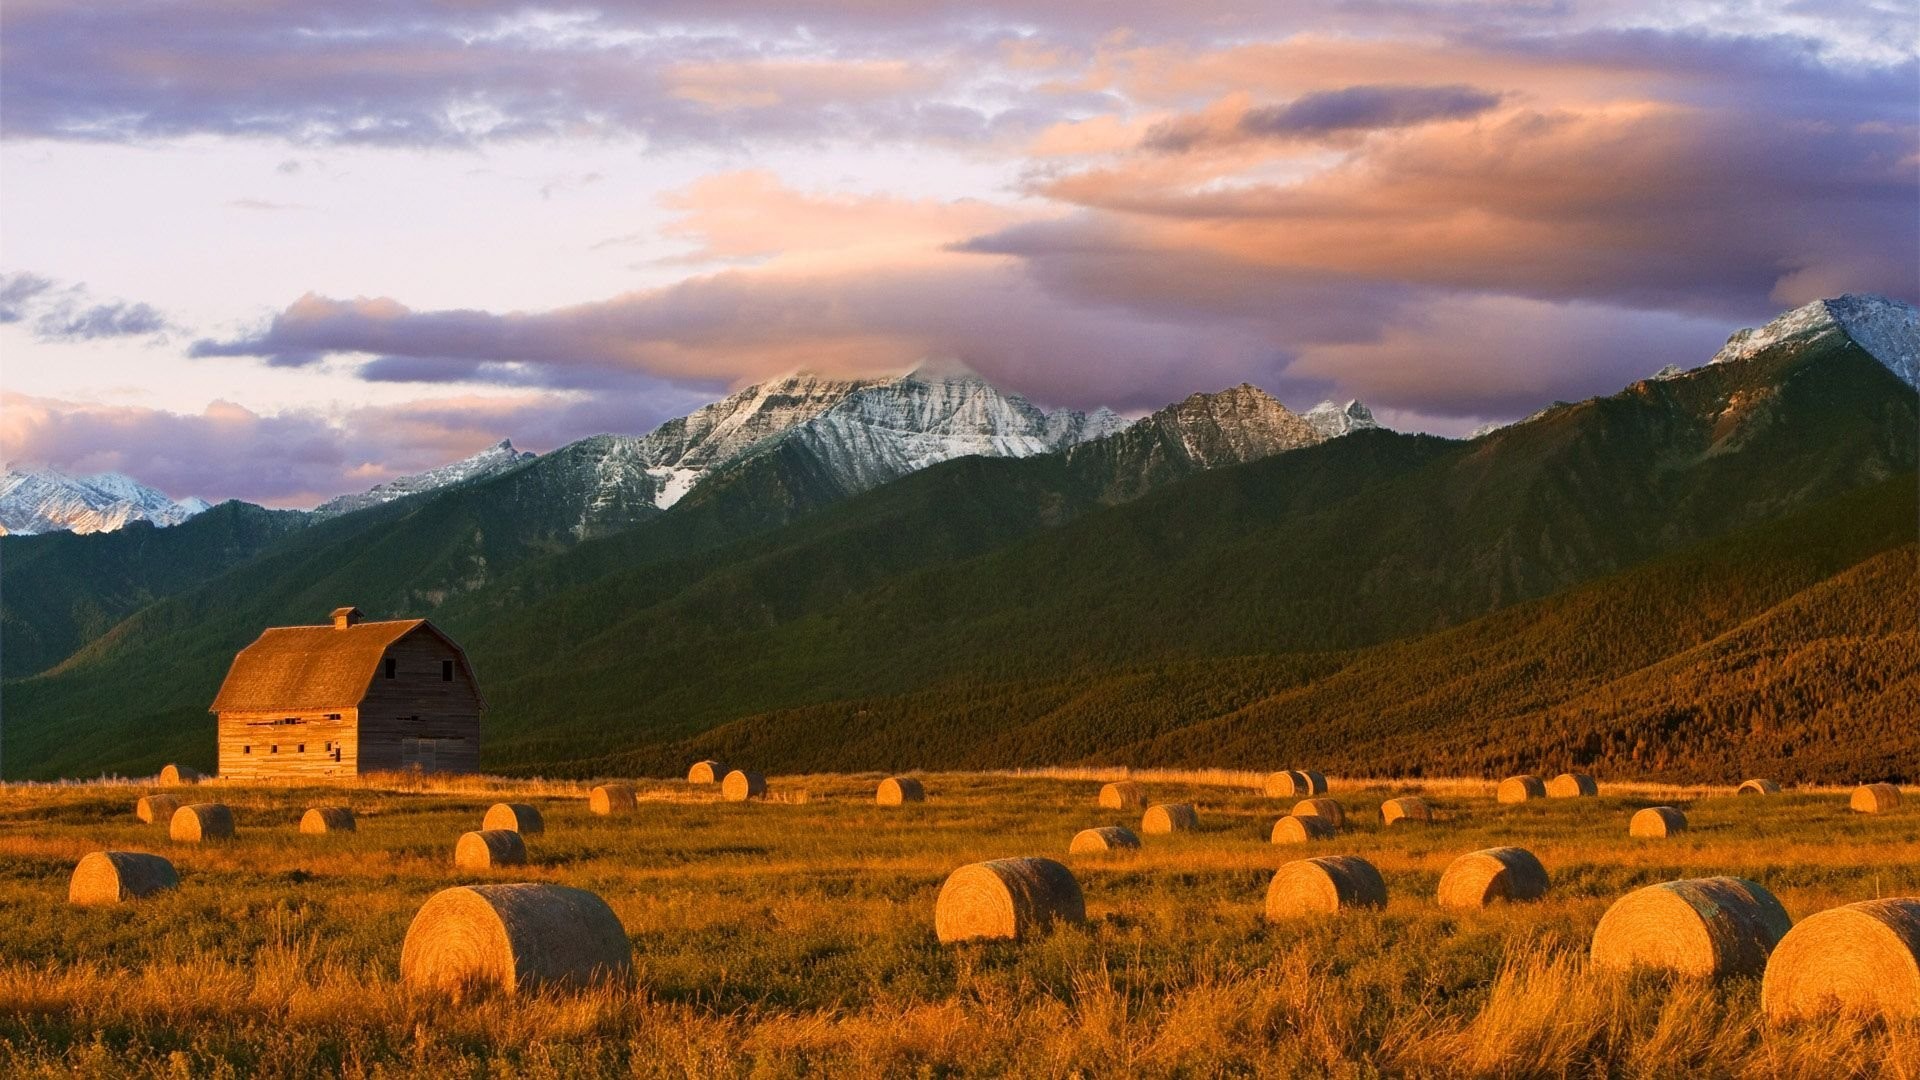 1920x1080 Barn And Hay Bales In The Mission Mountains